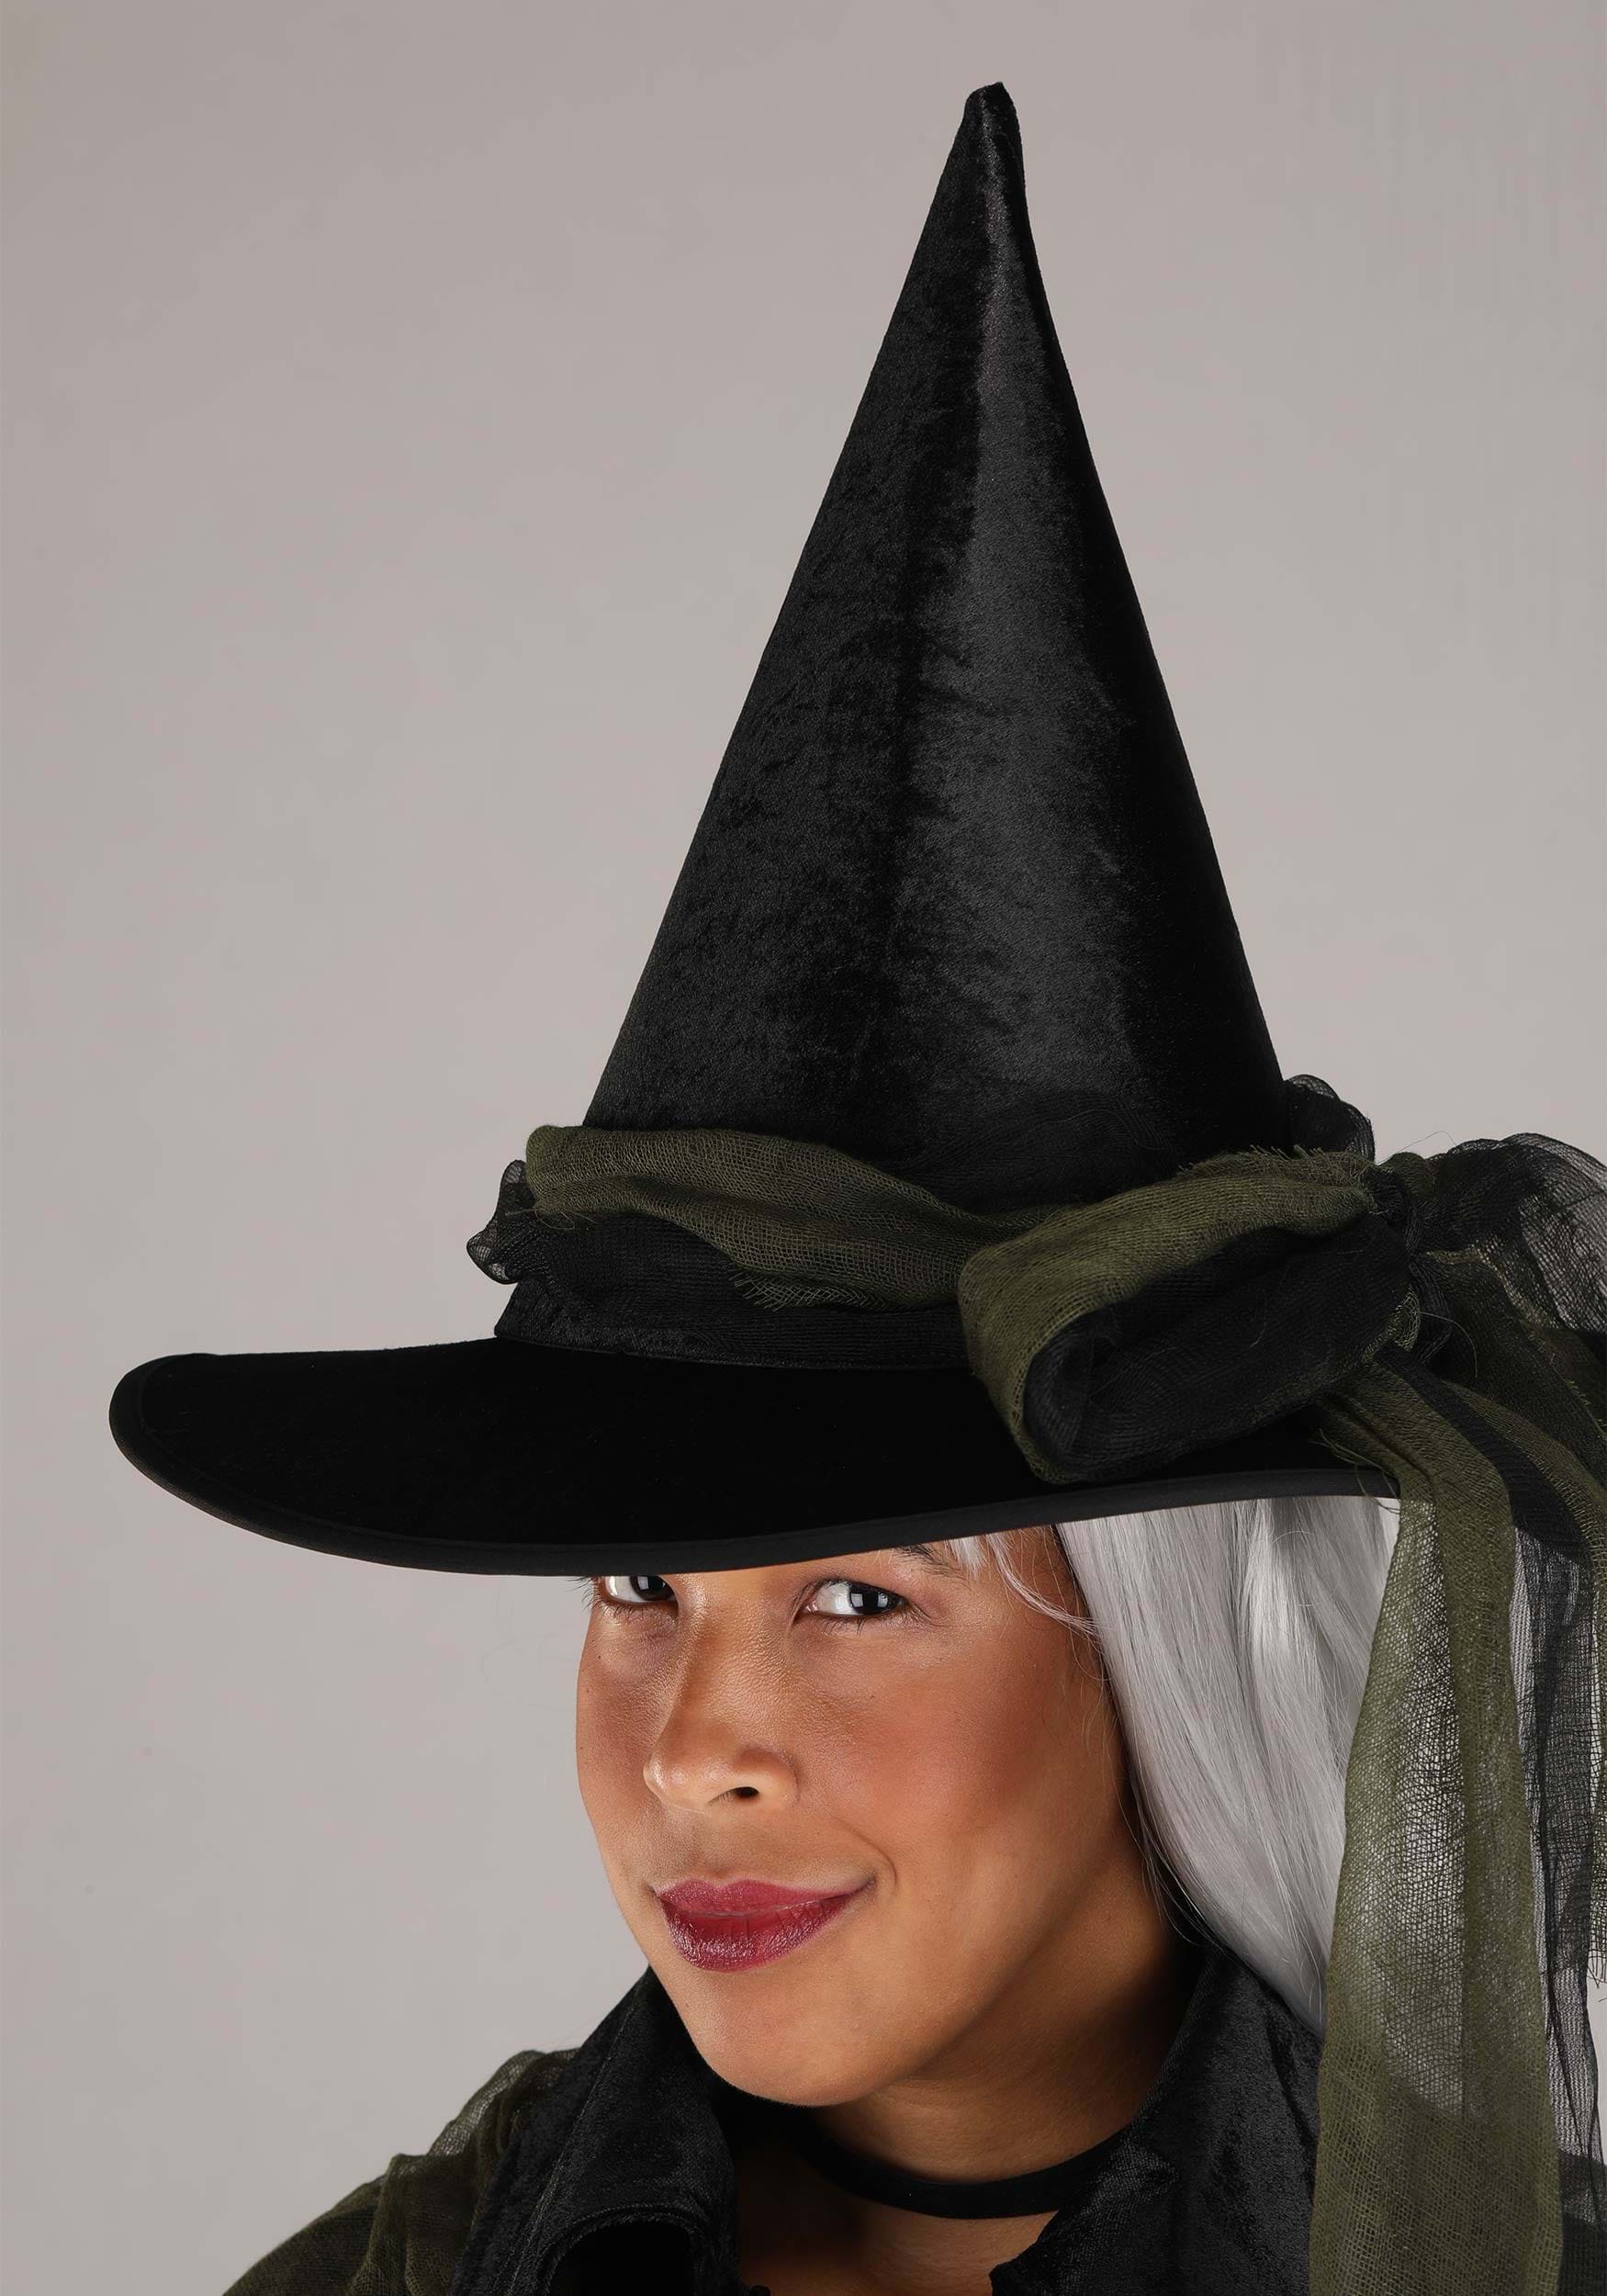 Cool Witch Costume For Women , Adult Sorceress Costume